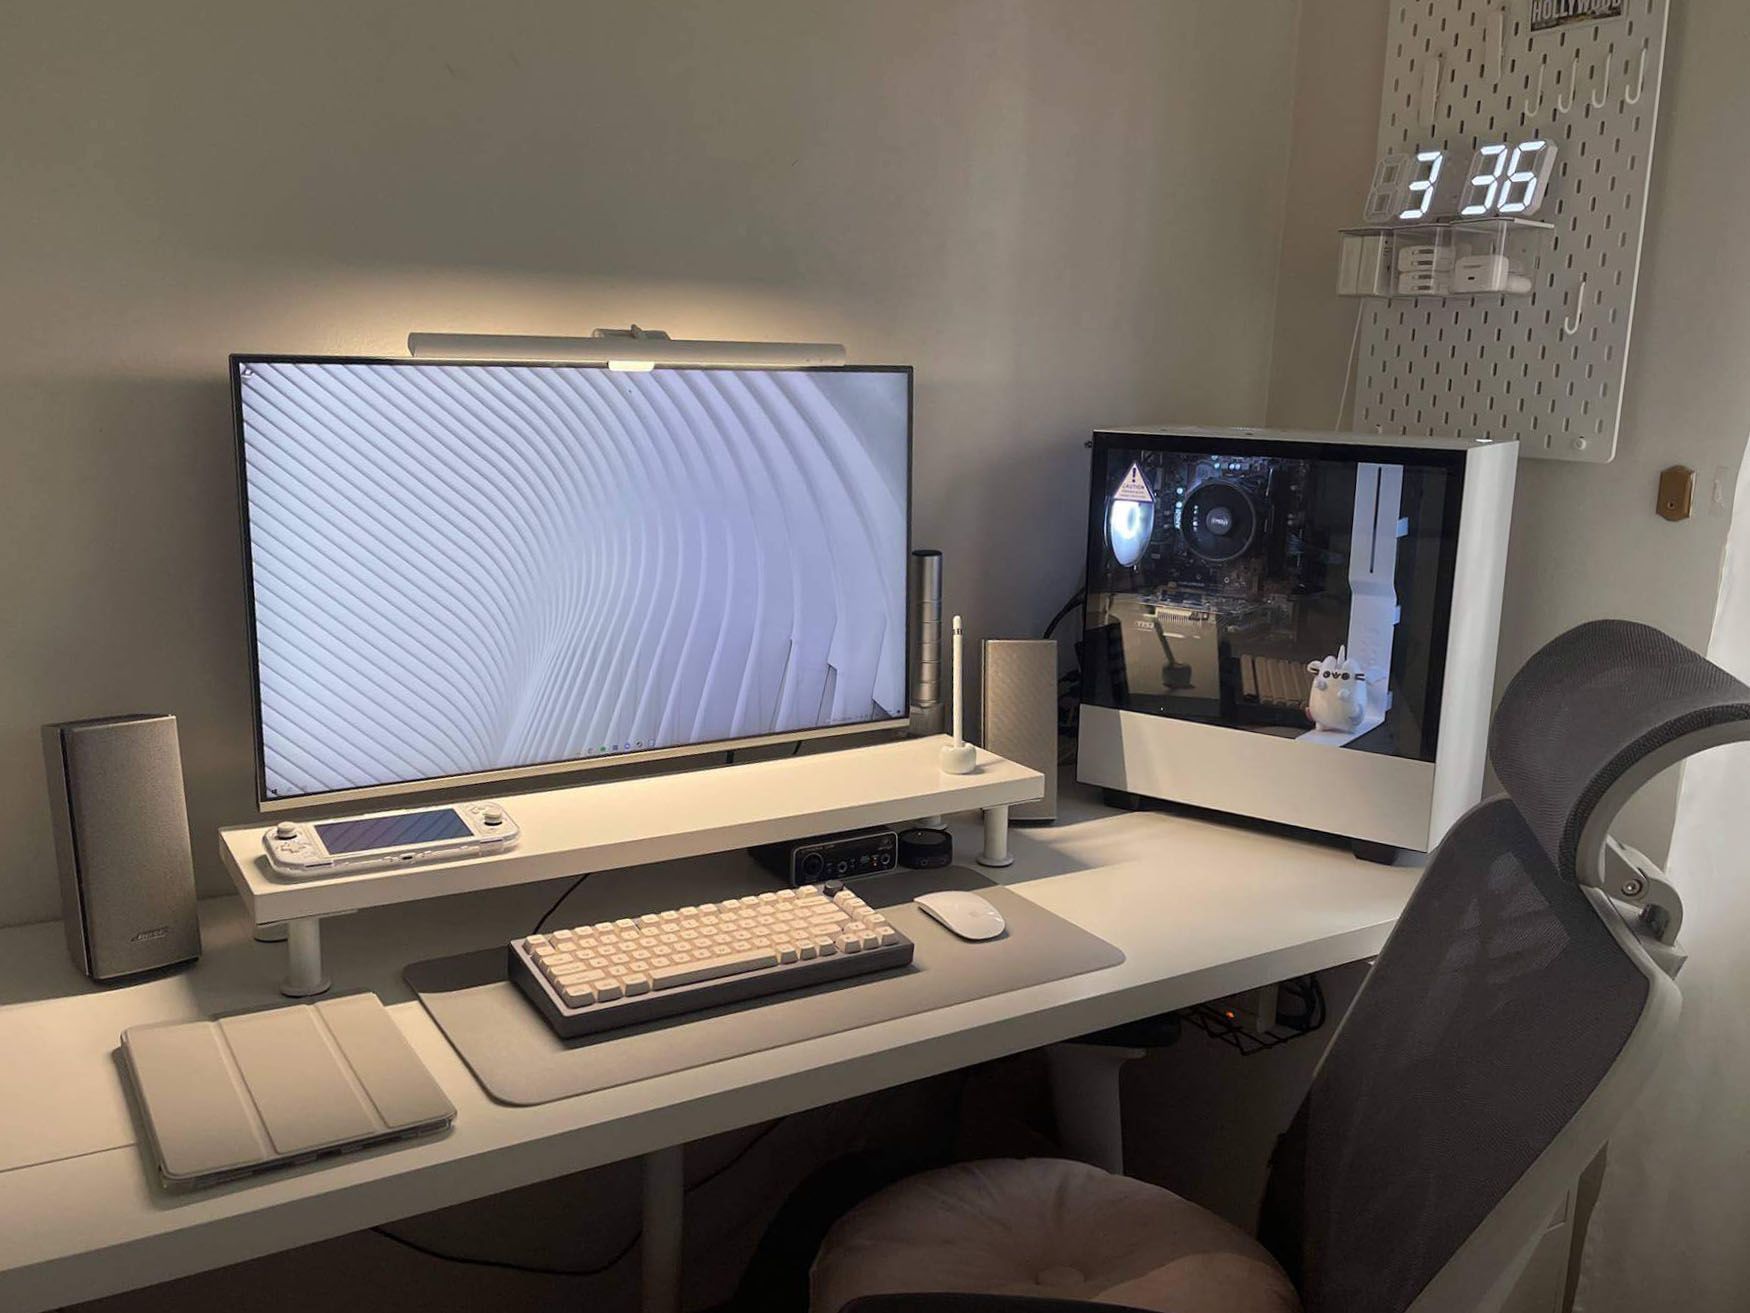 “Simple and monochromatic” desk setup is the way Aliza defines her workspace